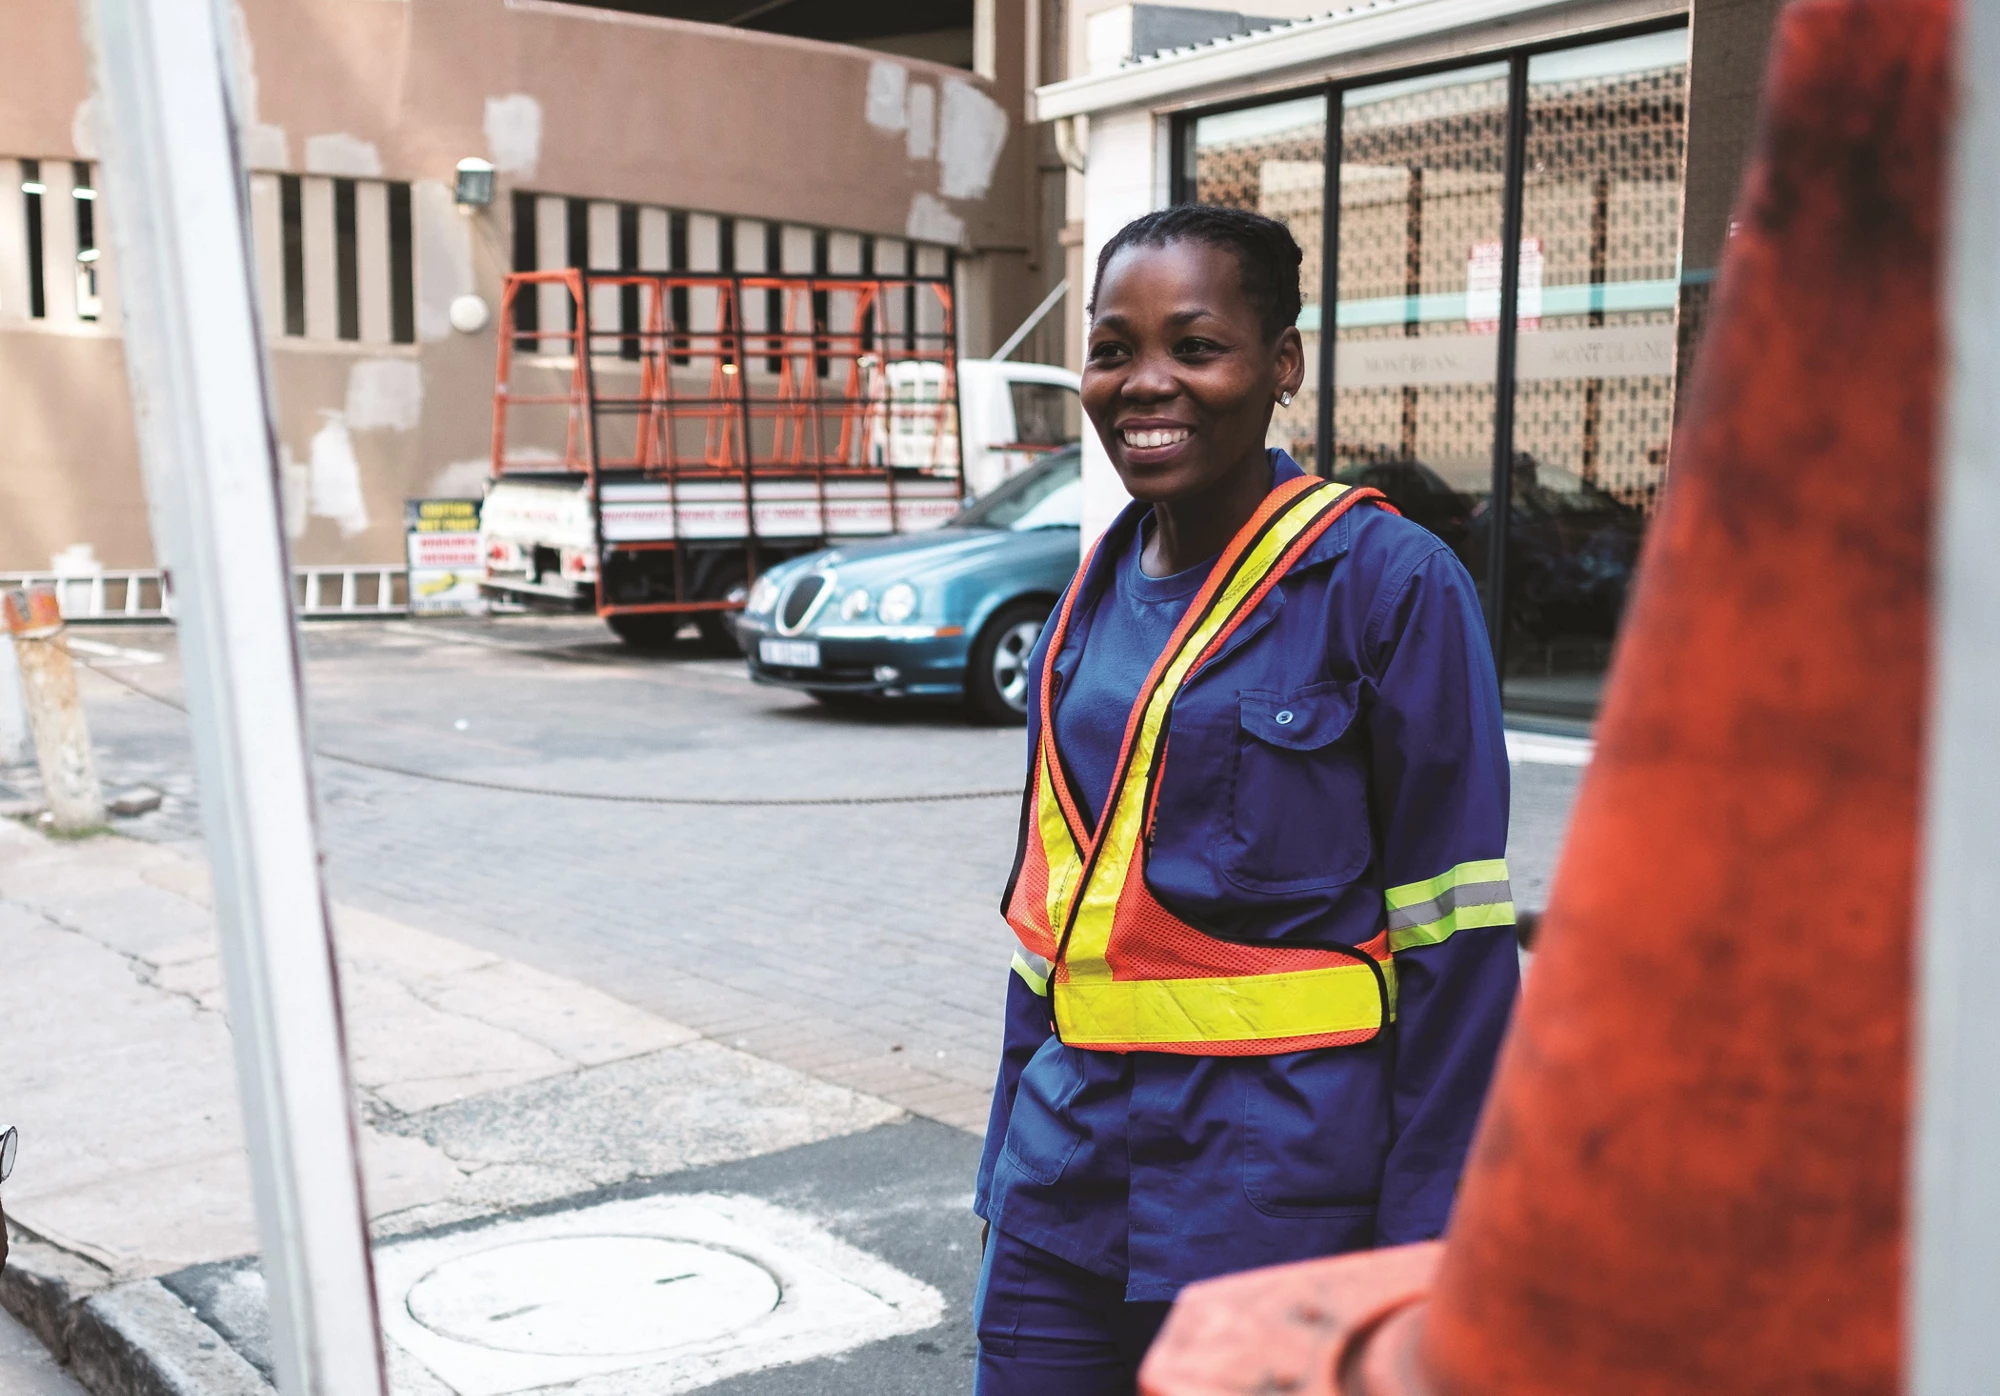 Senzi Dumakude, a member of an eThekwini Municipality sewage blockage crew at work in Durban. Her team uses flexible rods to clear blockages in pipes leading to the main sewer lines in South Africa, March 2019. © WaterAid/Nyani Quarmyne